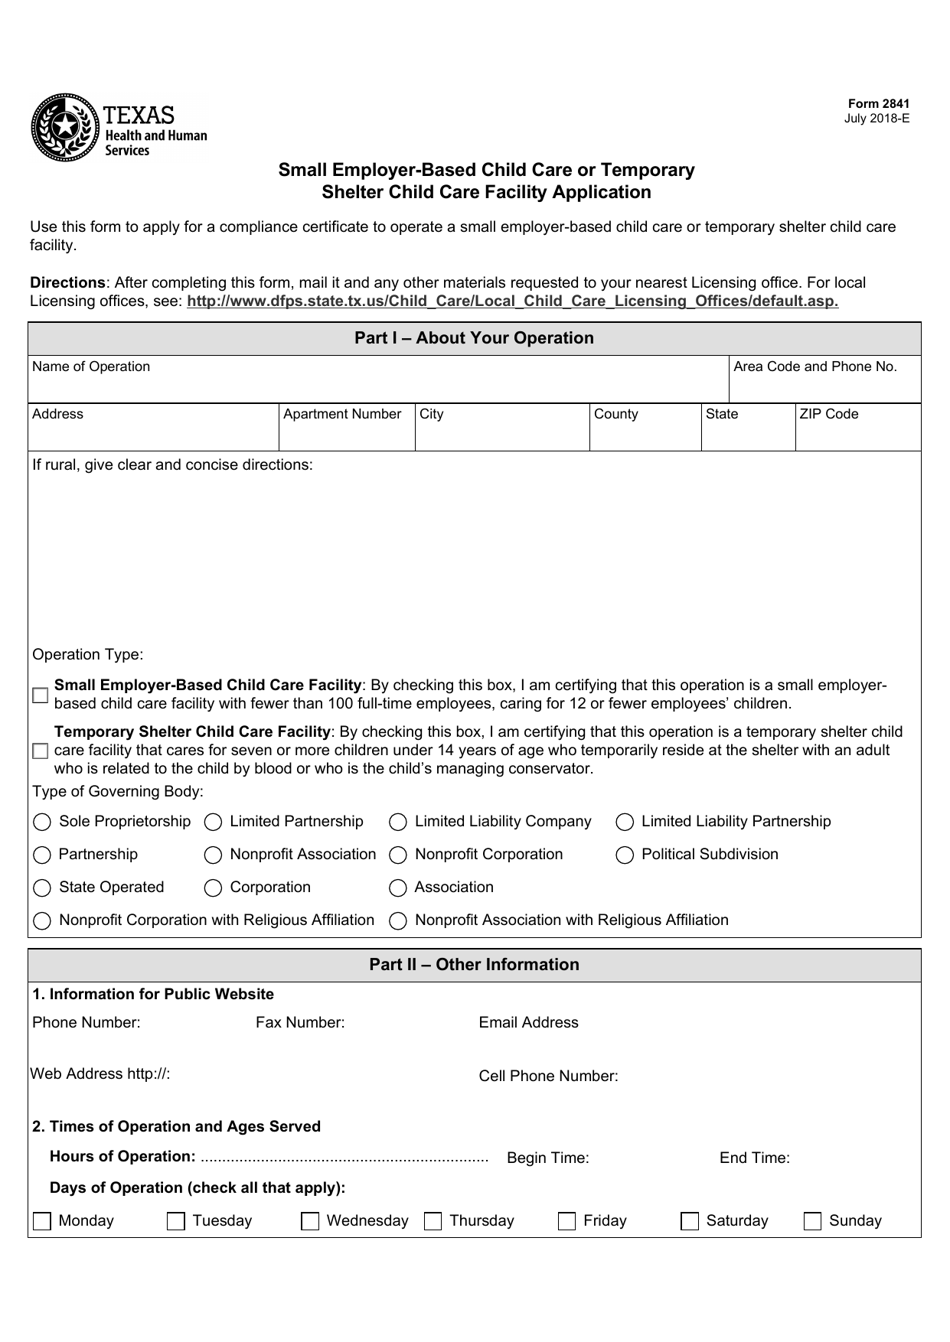 Form 2841 Small Employer-Based Child Care or Temporary Shelter Child Care Facility Application - Texas, Page 1